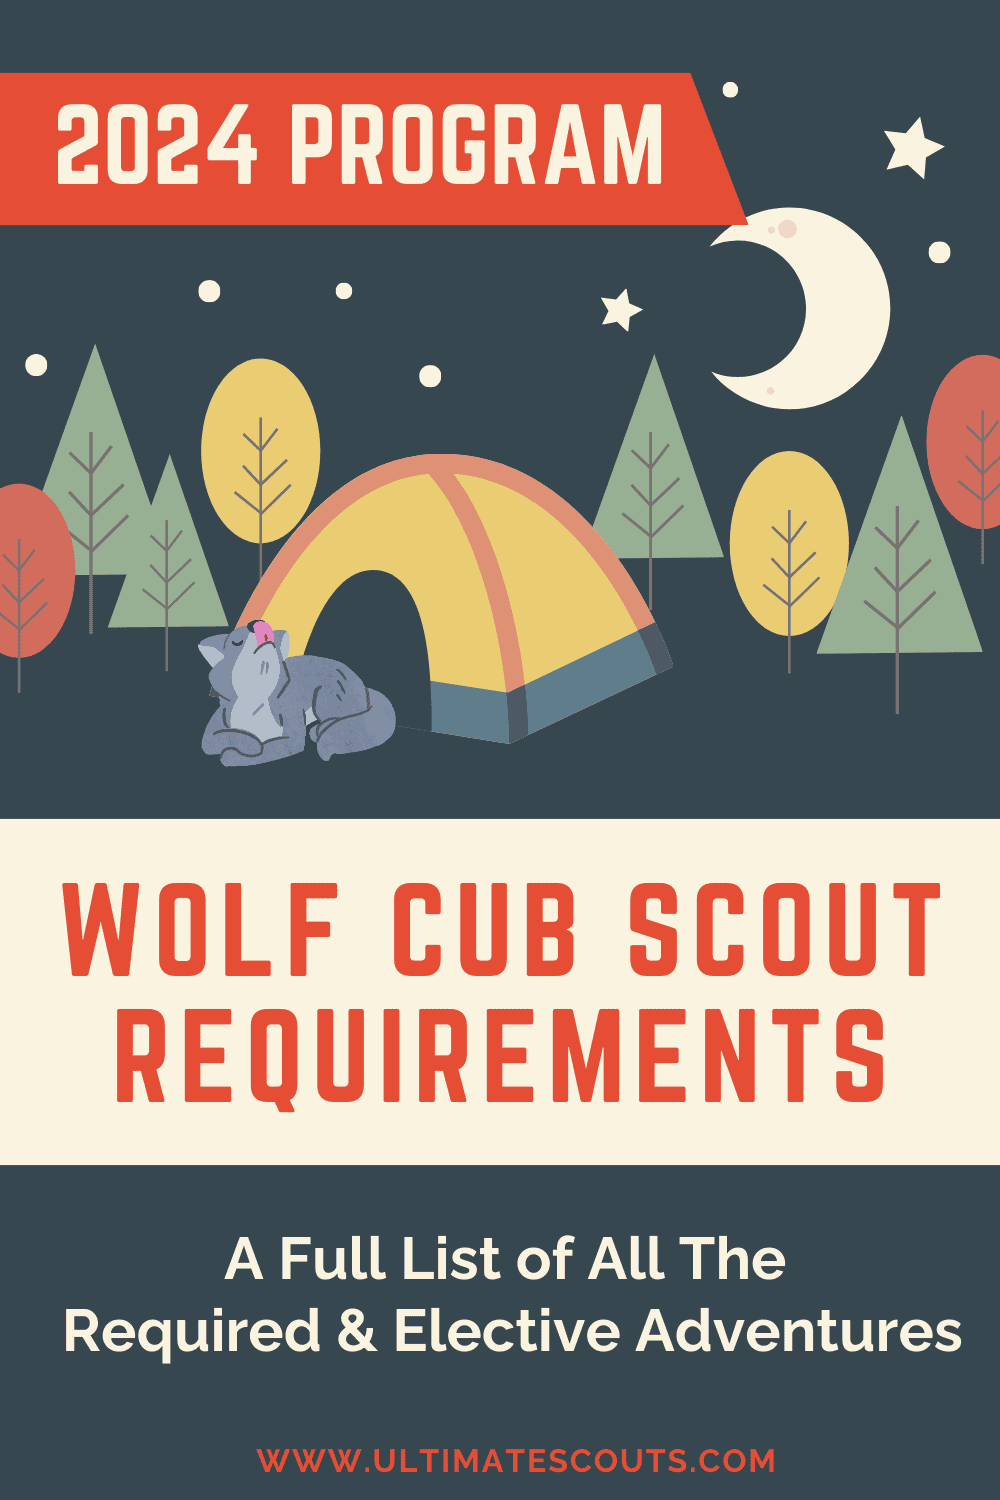 Wolf Cub Scout Requirements 2024